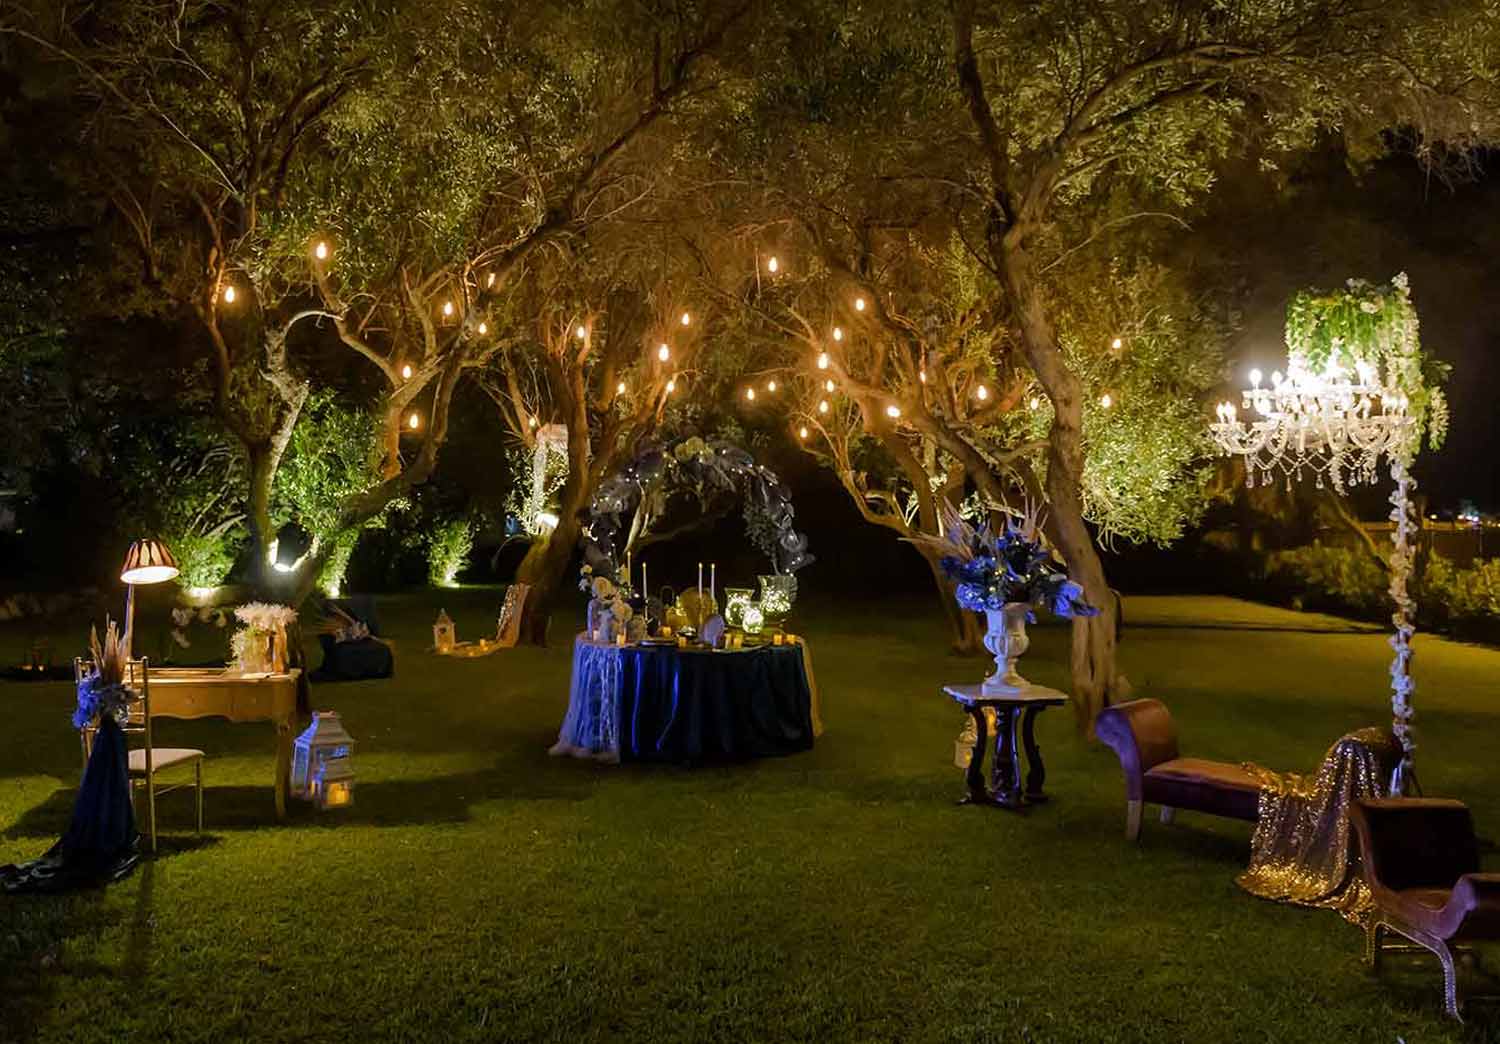 The appropriate lights on the tree branches show off the colors on the wishing table